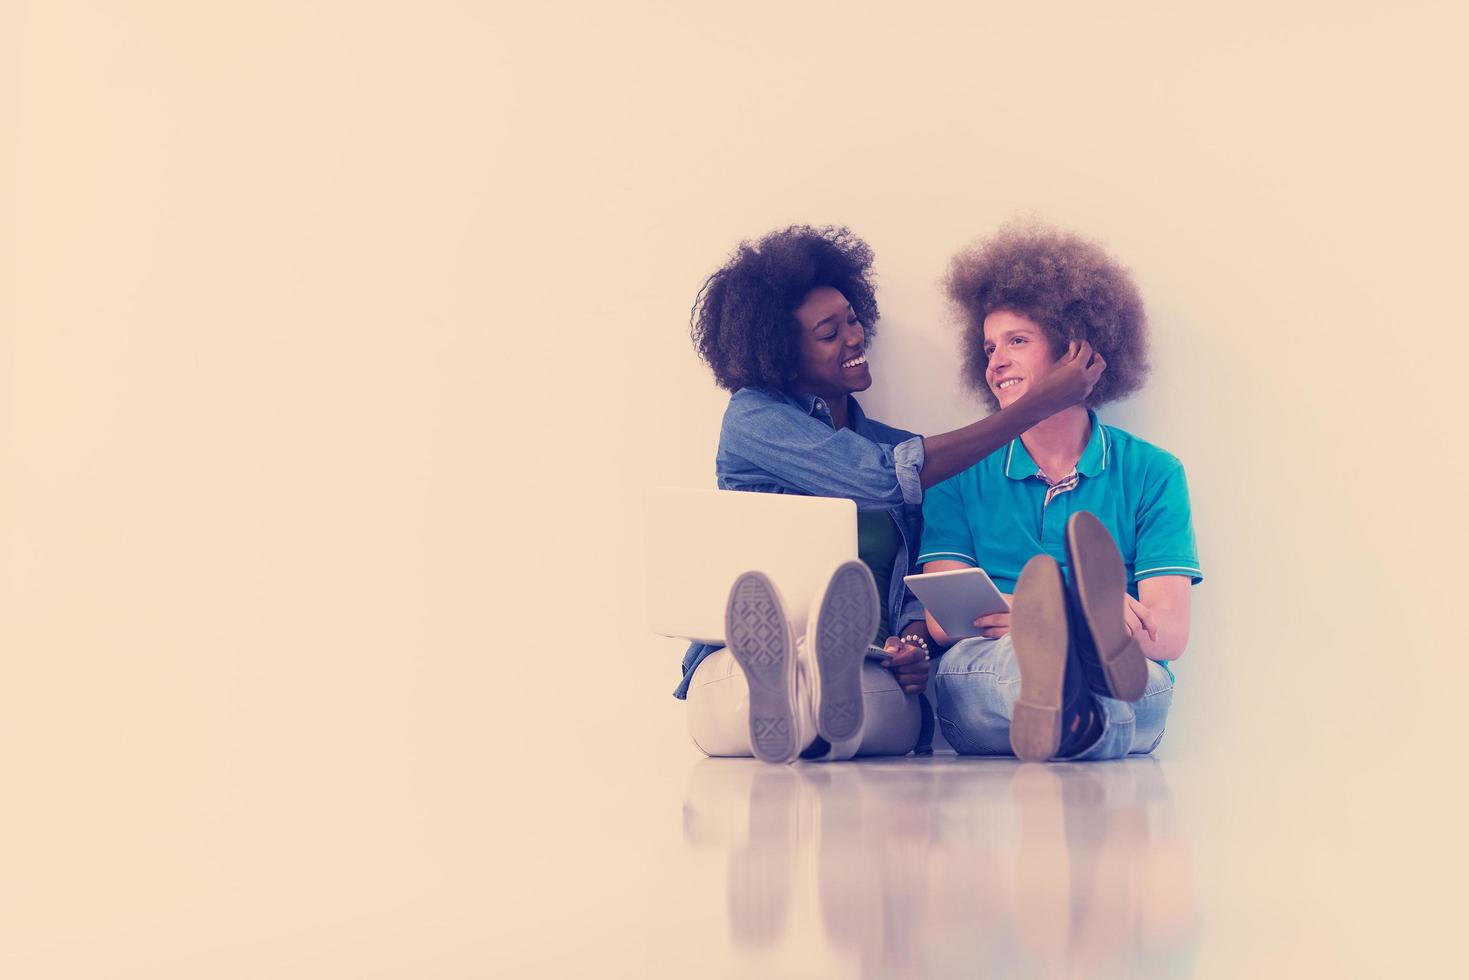 multiethnic couple sitting on the floor with a laptop and tablet photo